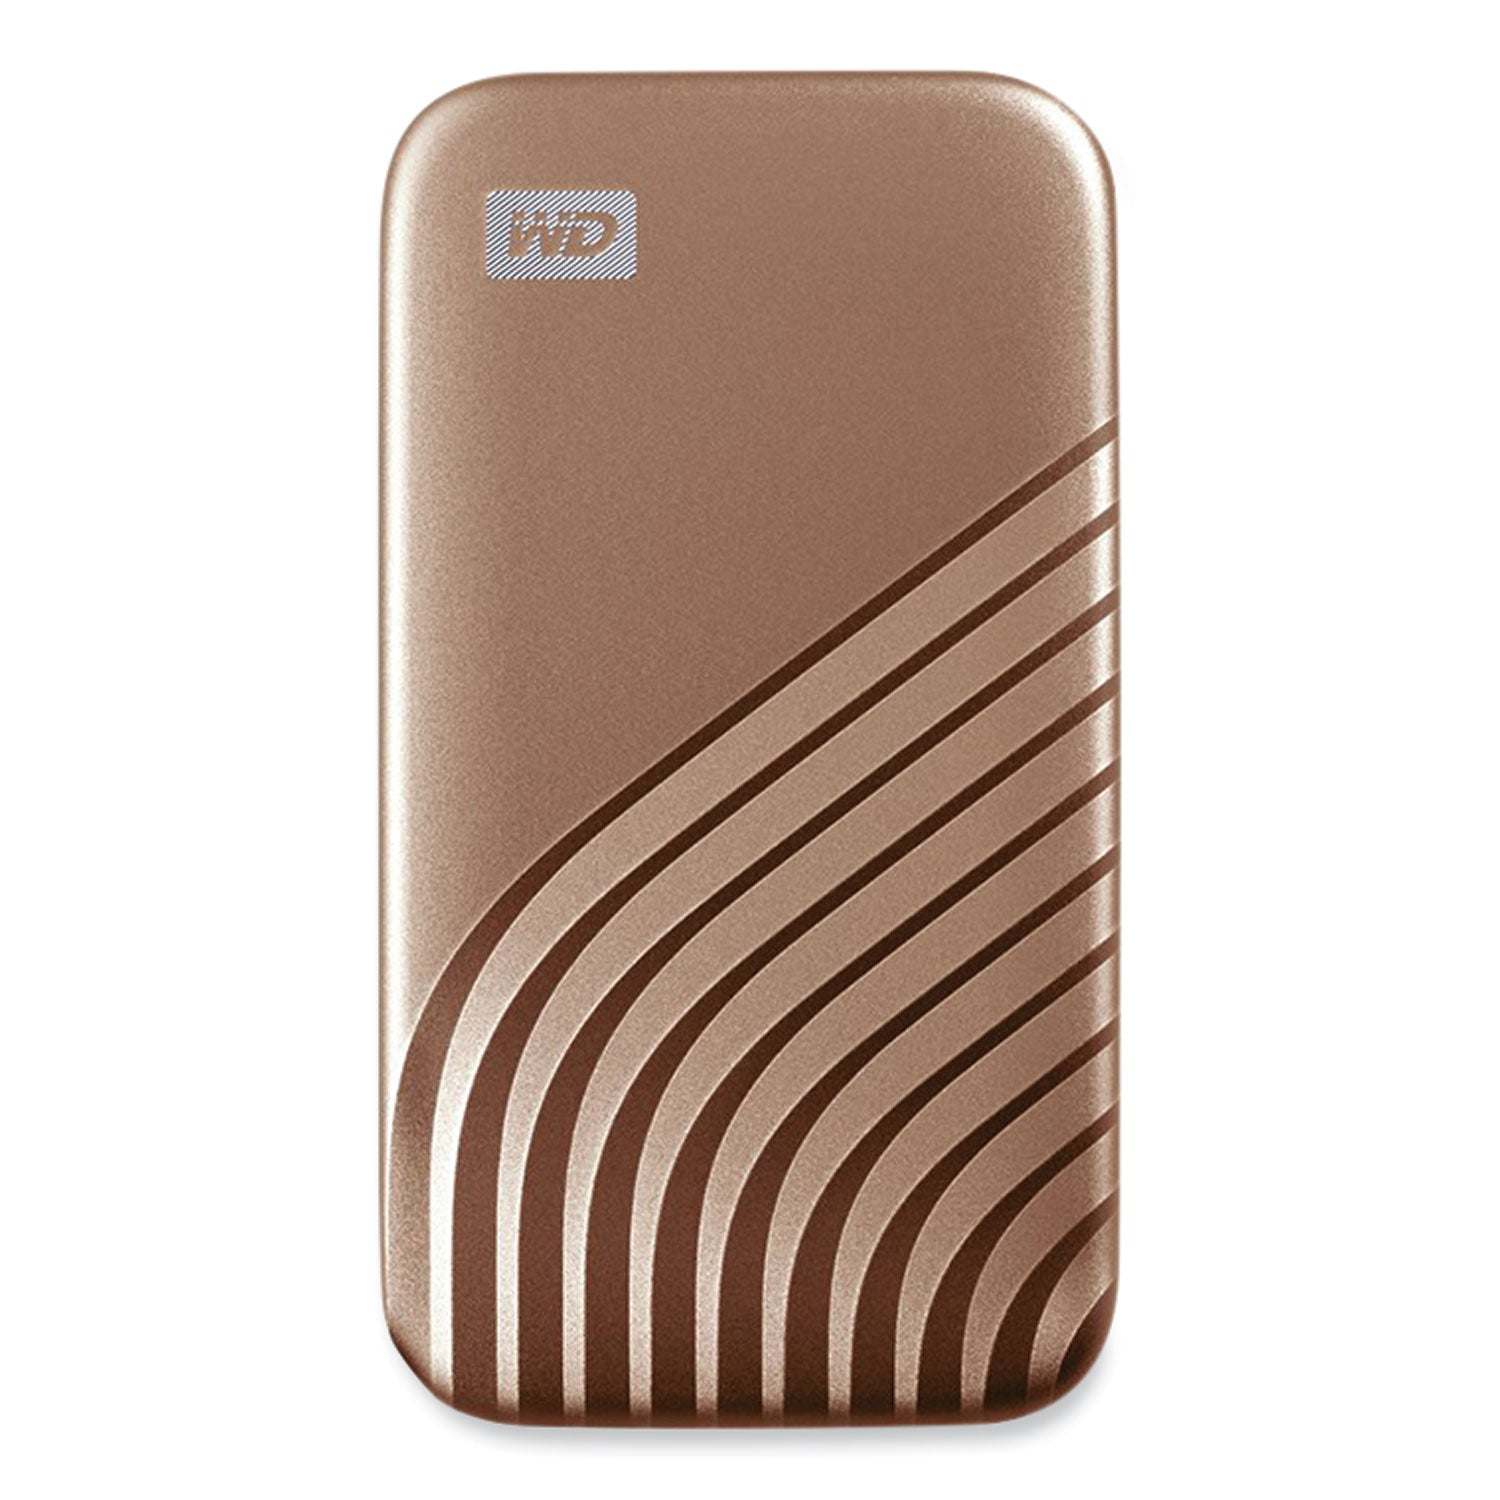 my-passport-external-solid-state-drive-2-tb-usb-32-gold_wdcagf0020bgd - 1